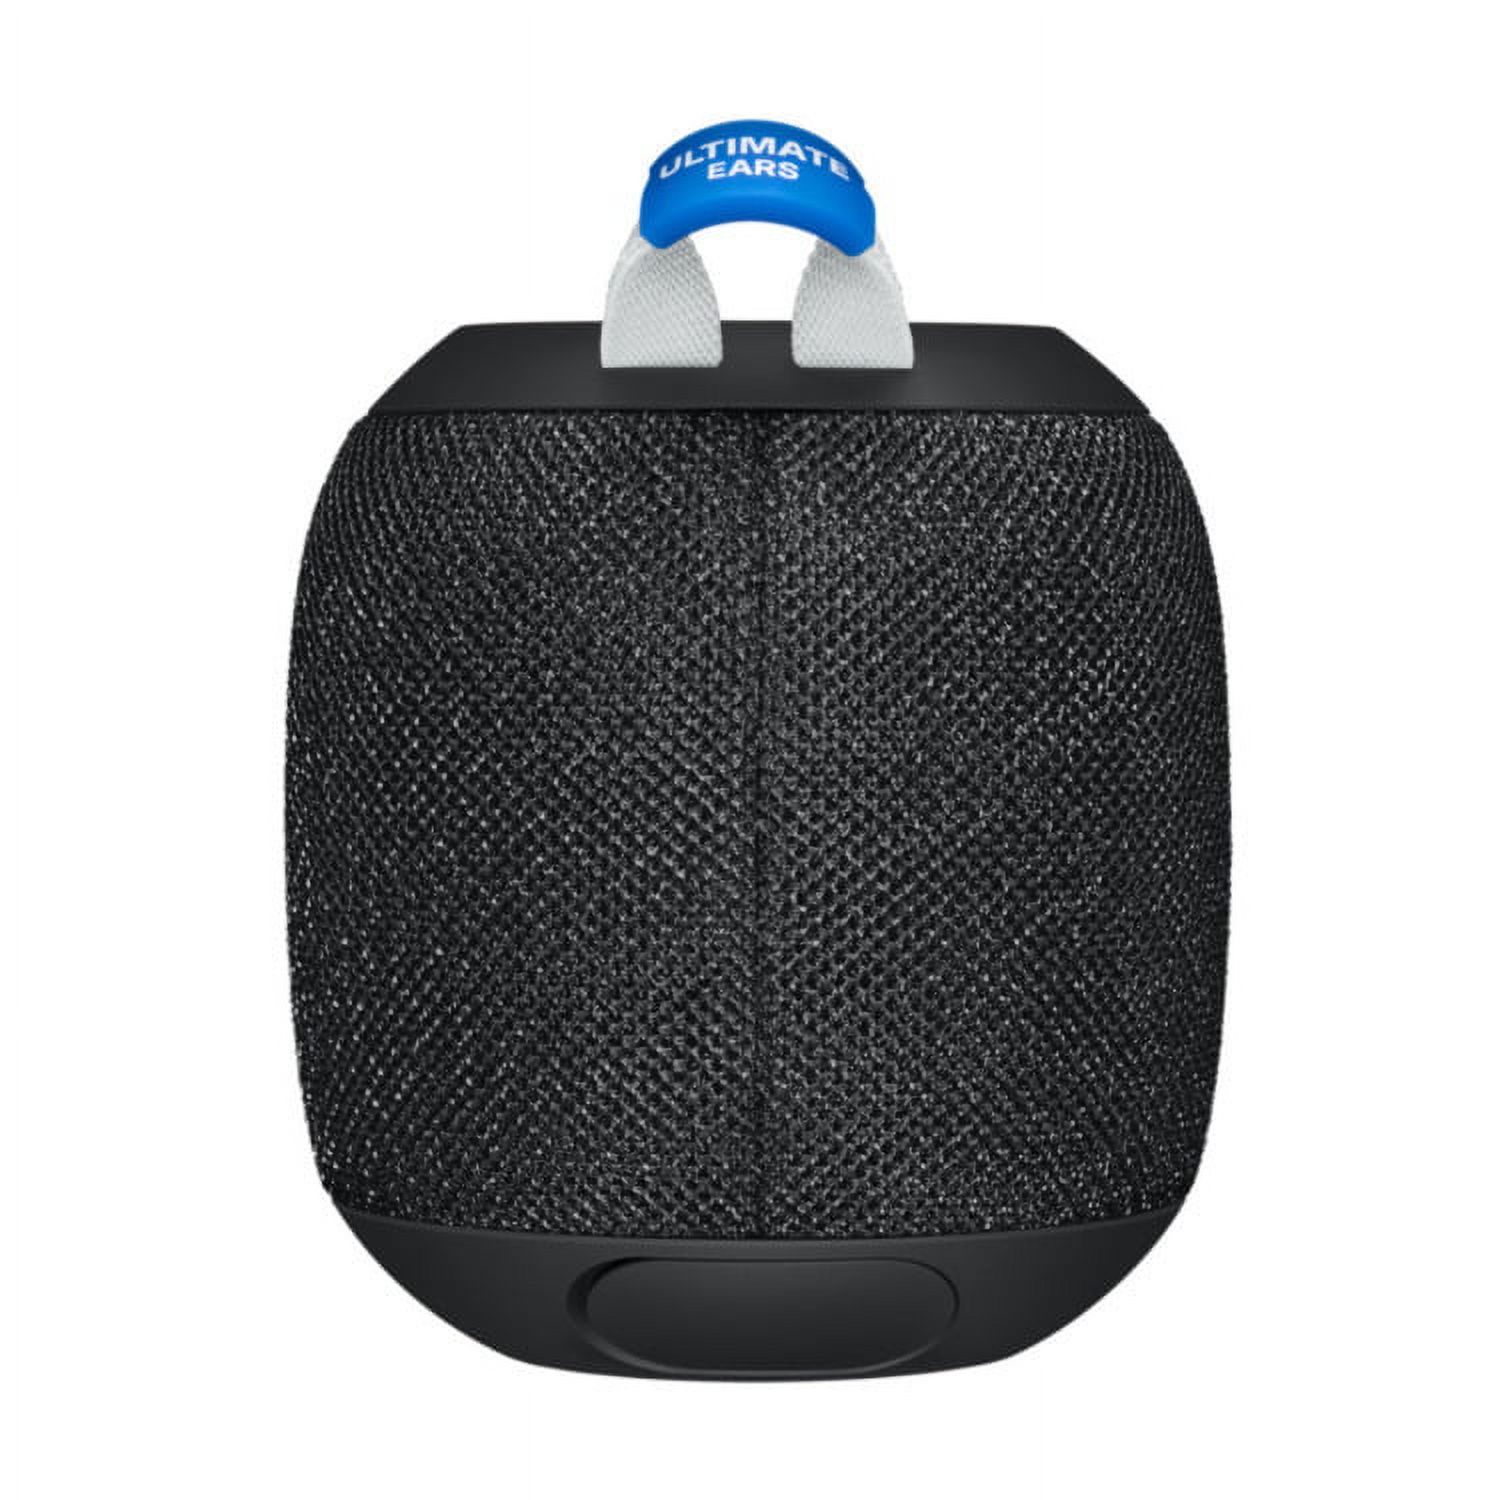 2 Ultimate Ears WONDERBOOM 2 Bluetooth Speakers with 2 Cables and AC Adapter - image 5 of 9